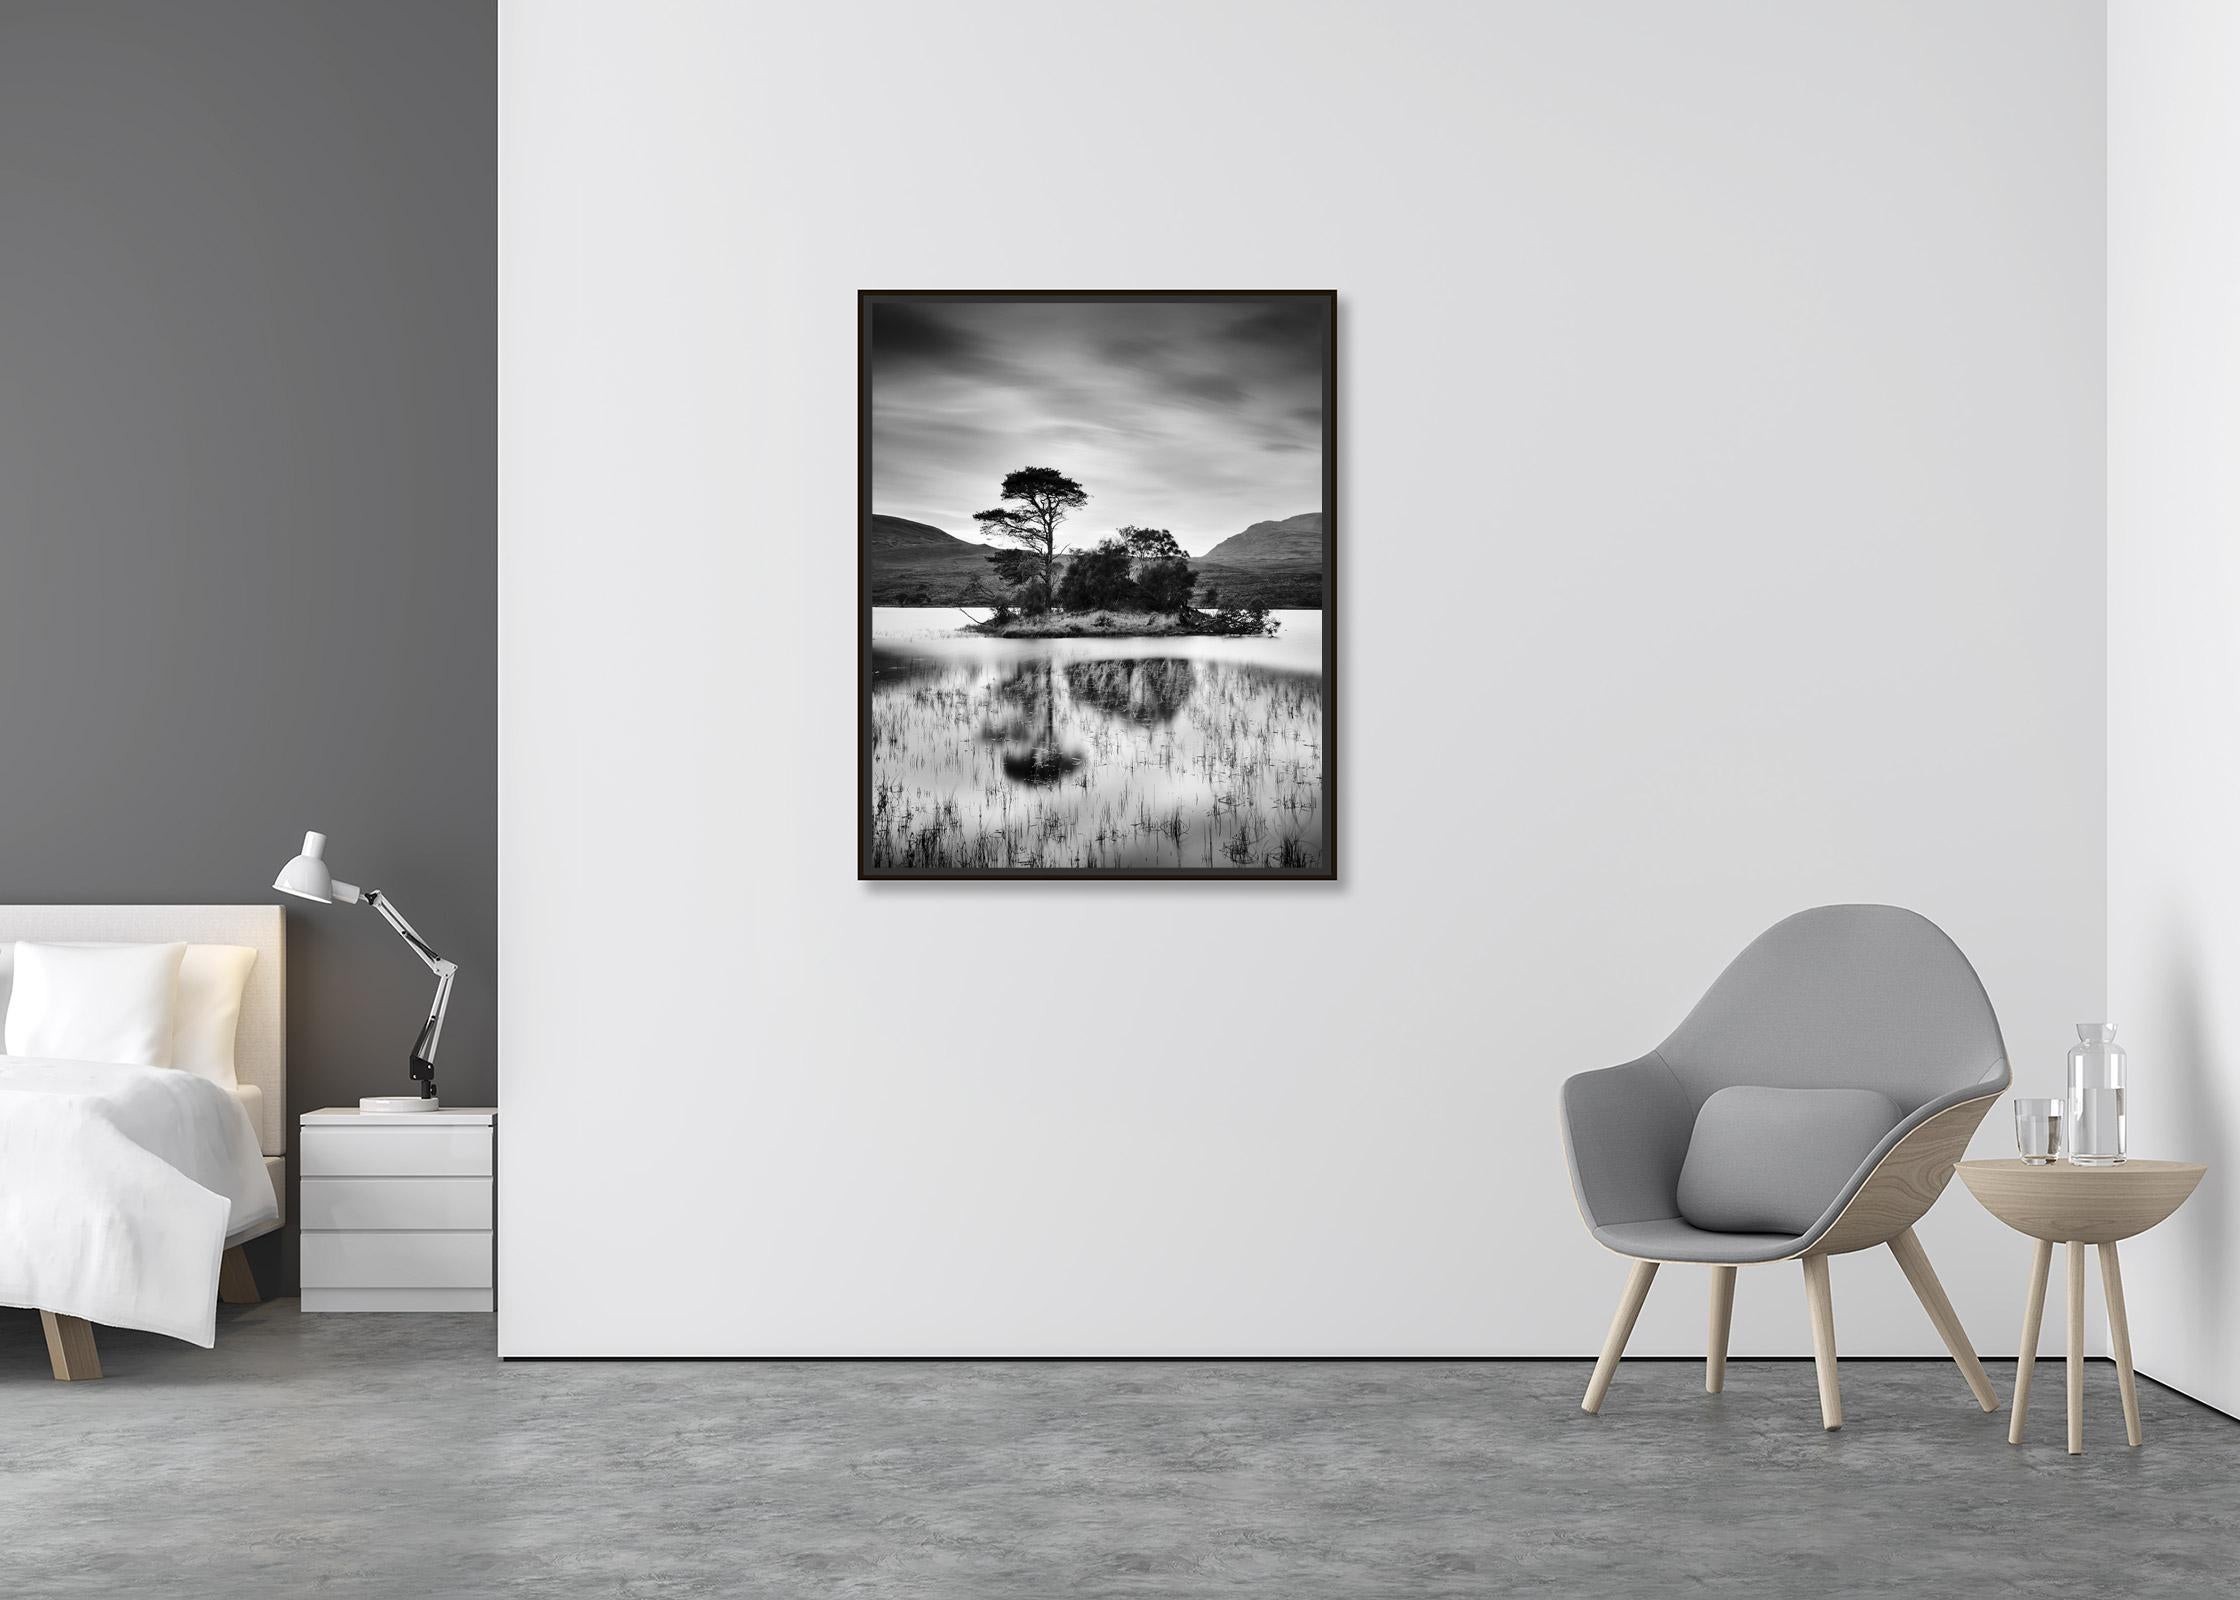 After the Sunset, Tree, Island, Scotland, black and white landscape photography - Contemporary Photograph by Gerald Berghammer